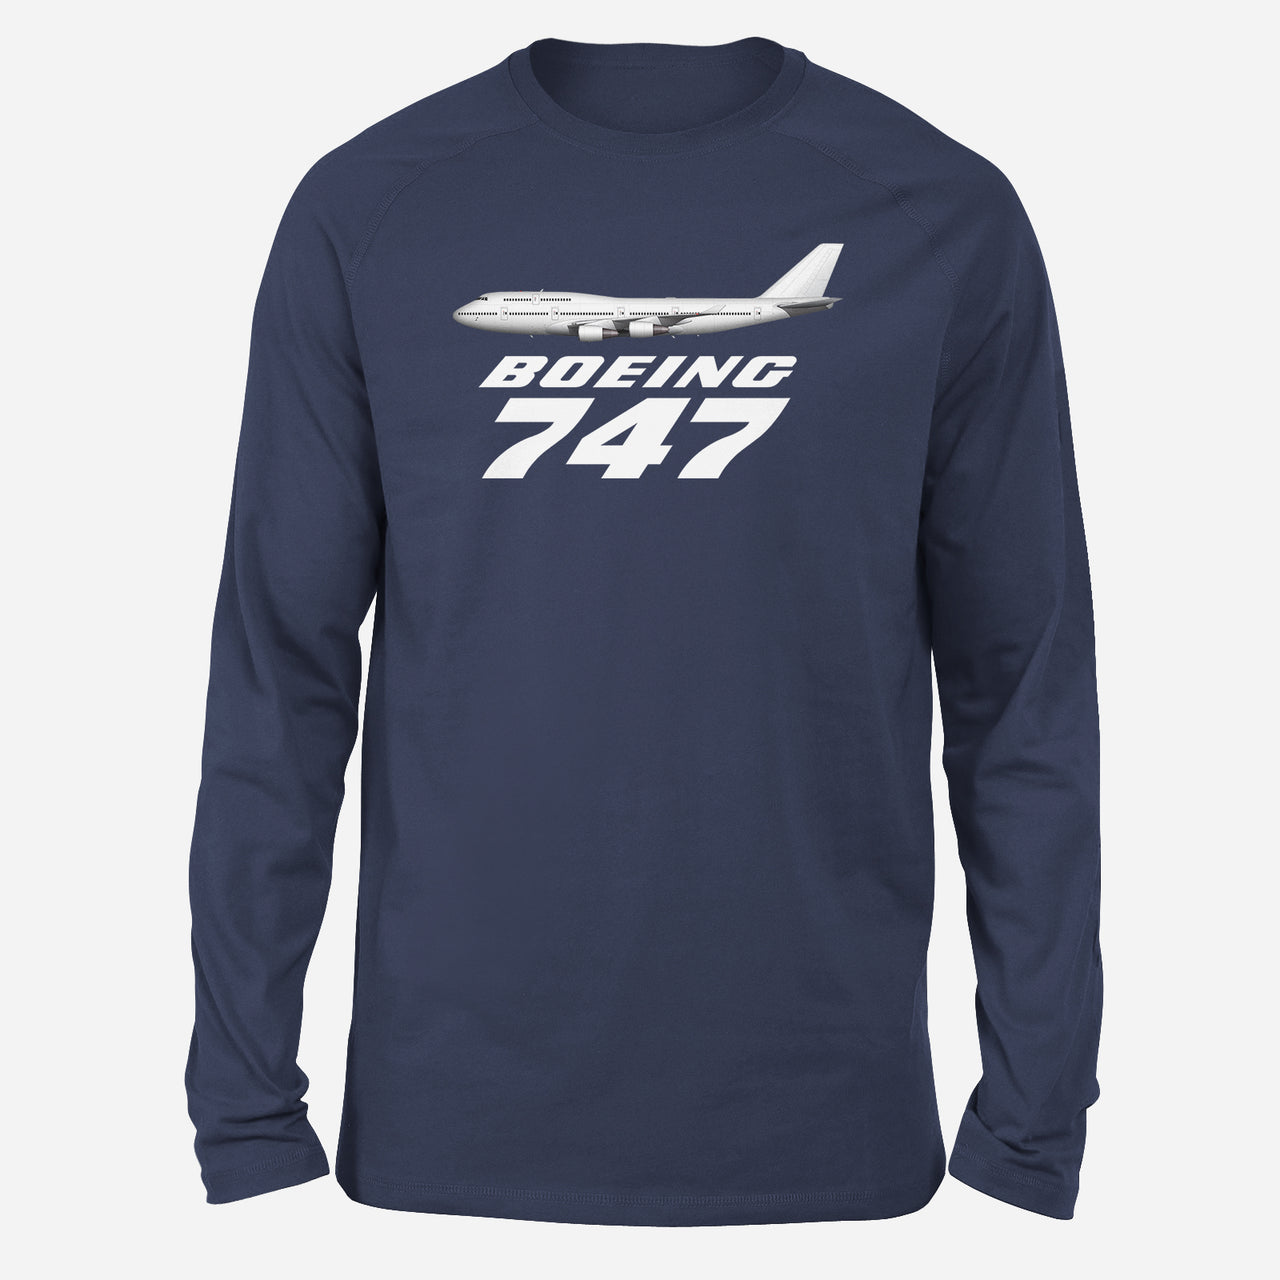 The Boeing 747 Designed Long-Sleeve T-Shirts